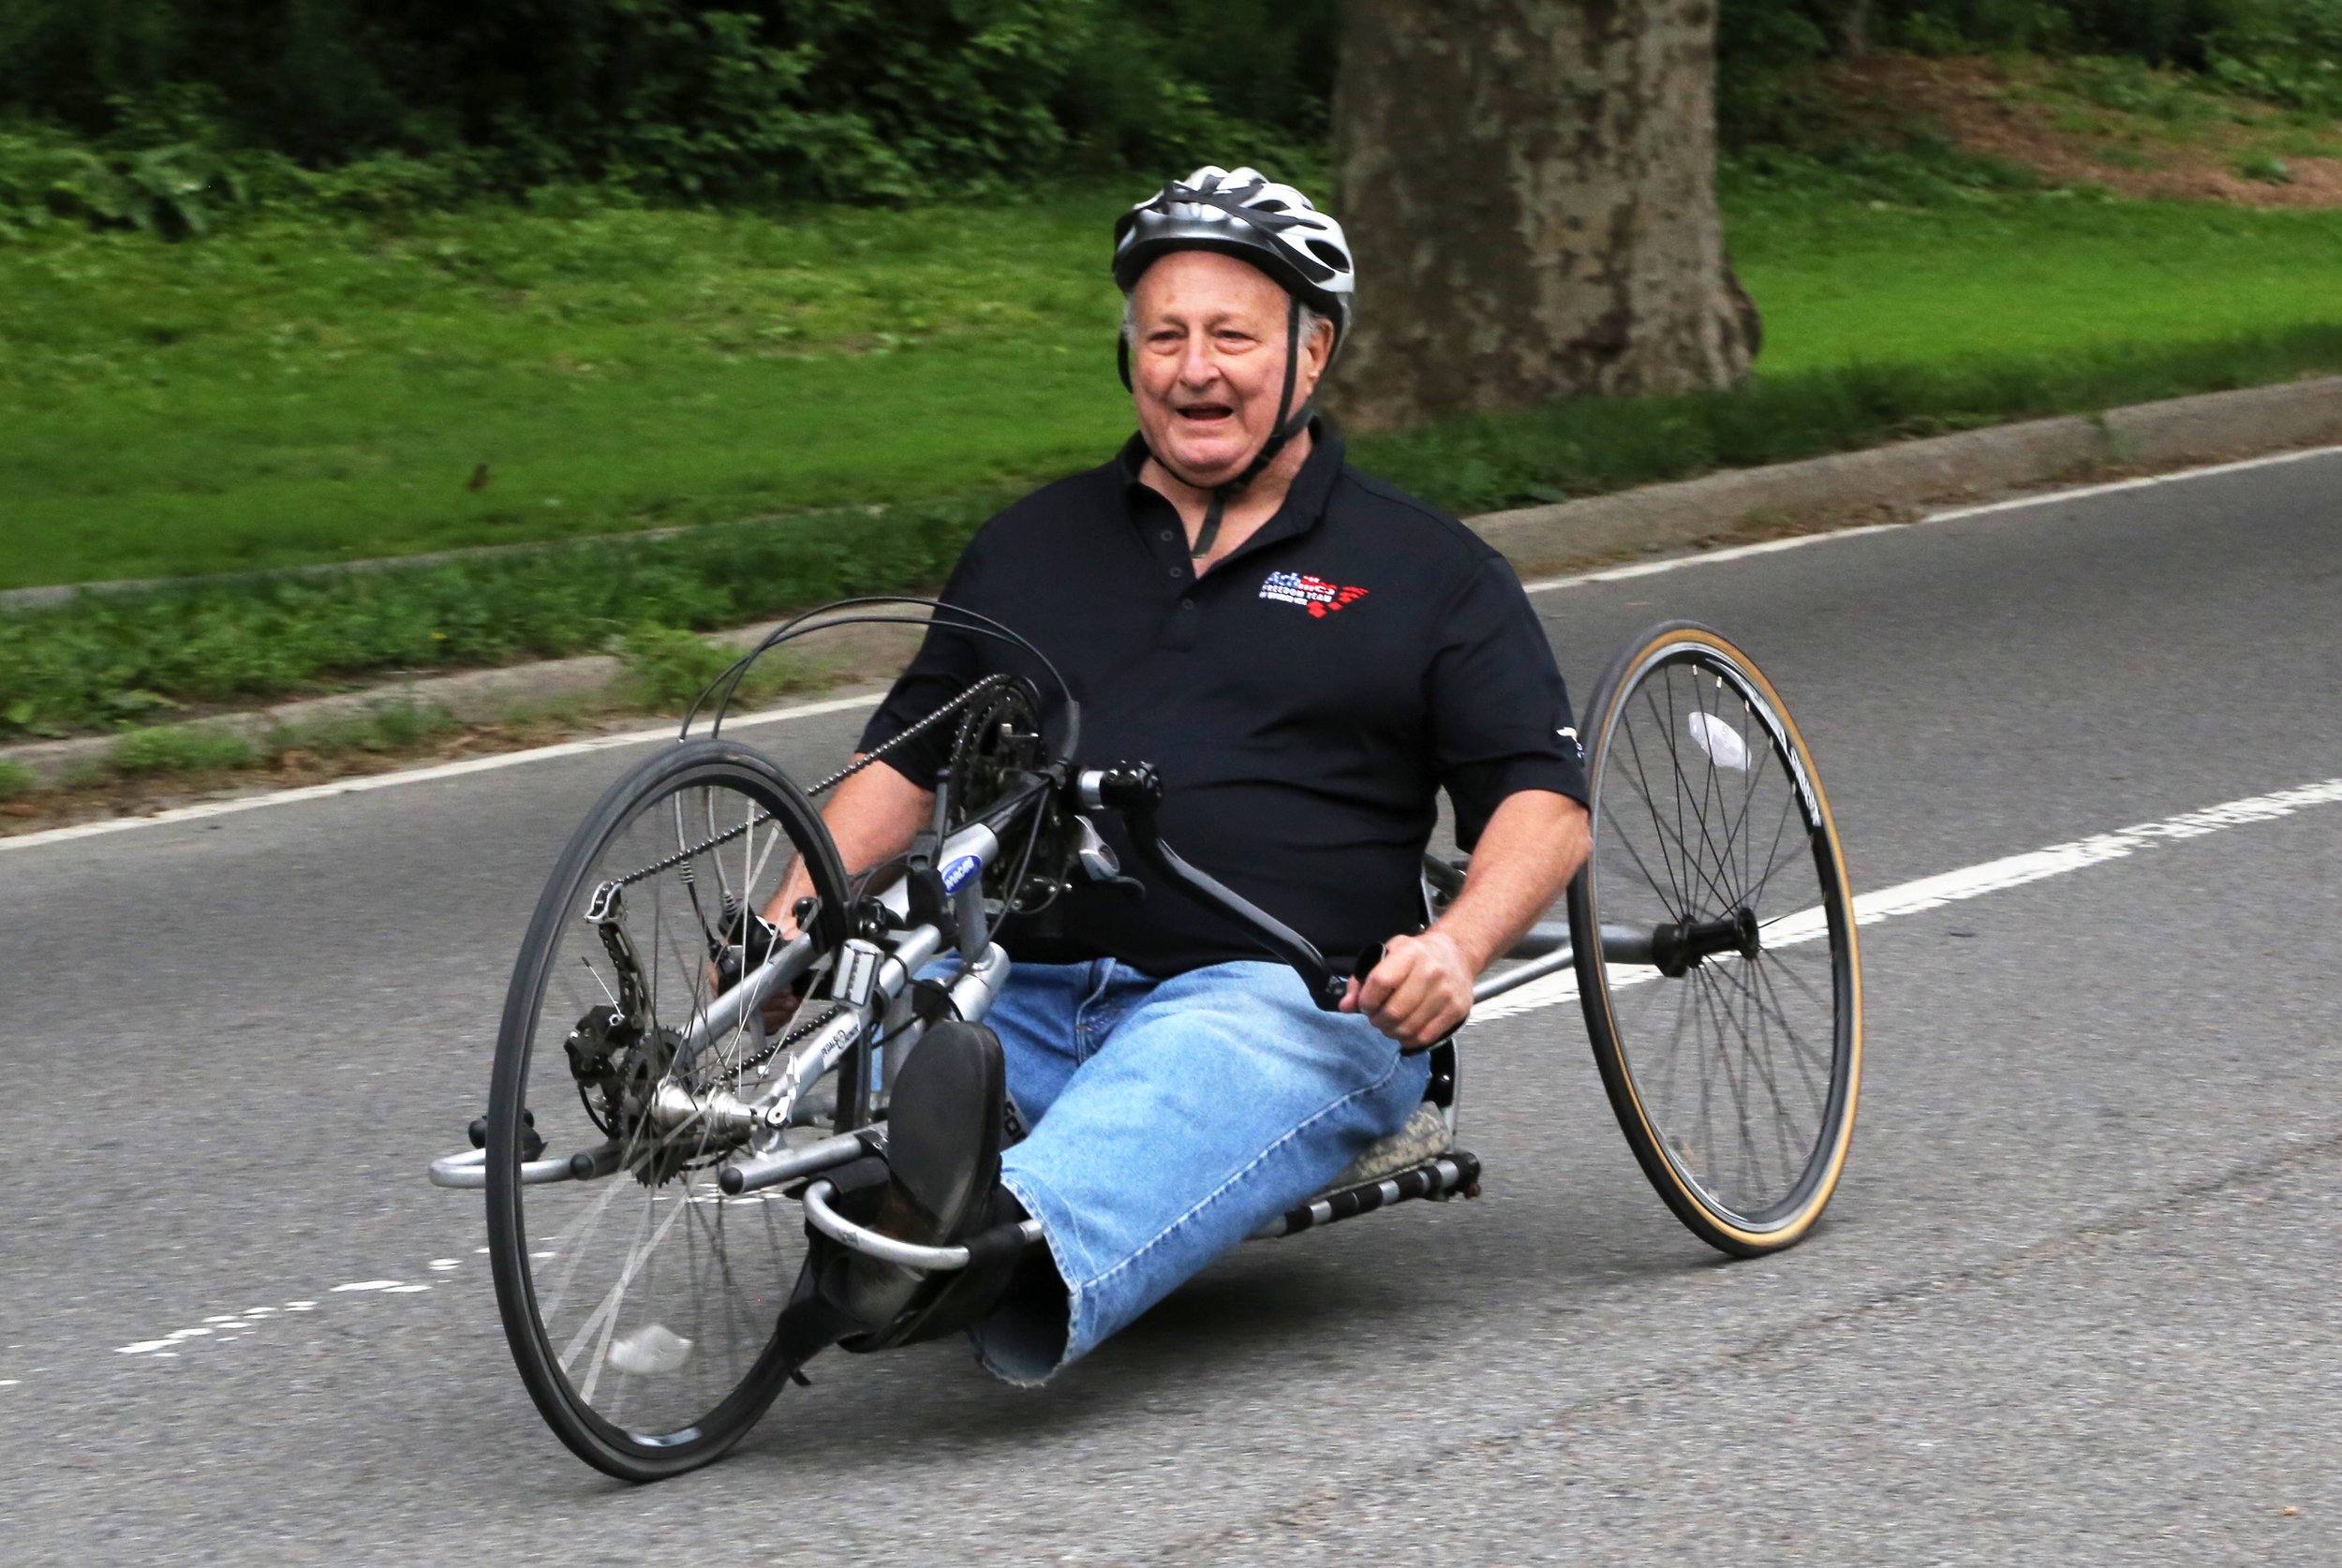  Dick Traum smiling while riding a handcycle 